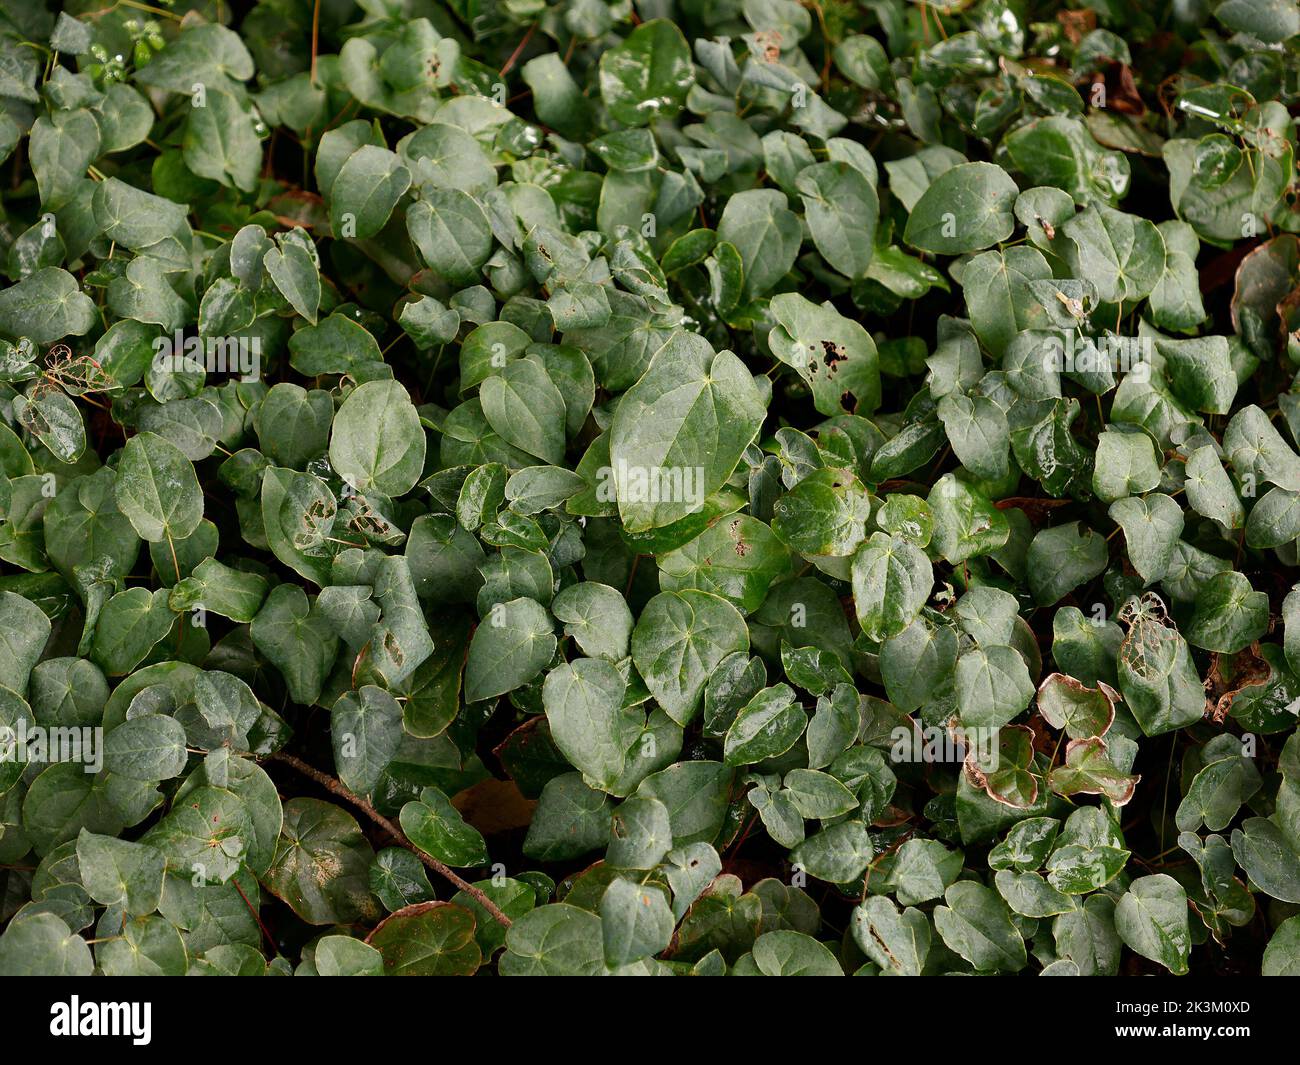 Close up of the evergreen ground covering plant Epimedium pinnatum ssp colchicum drought tolerant mat-forming rhizomatous perennial with oval leaves. Stock Photo